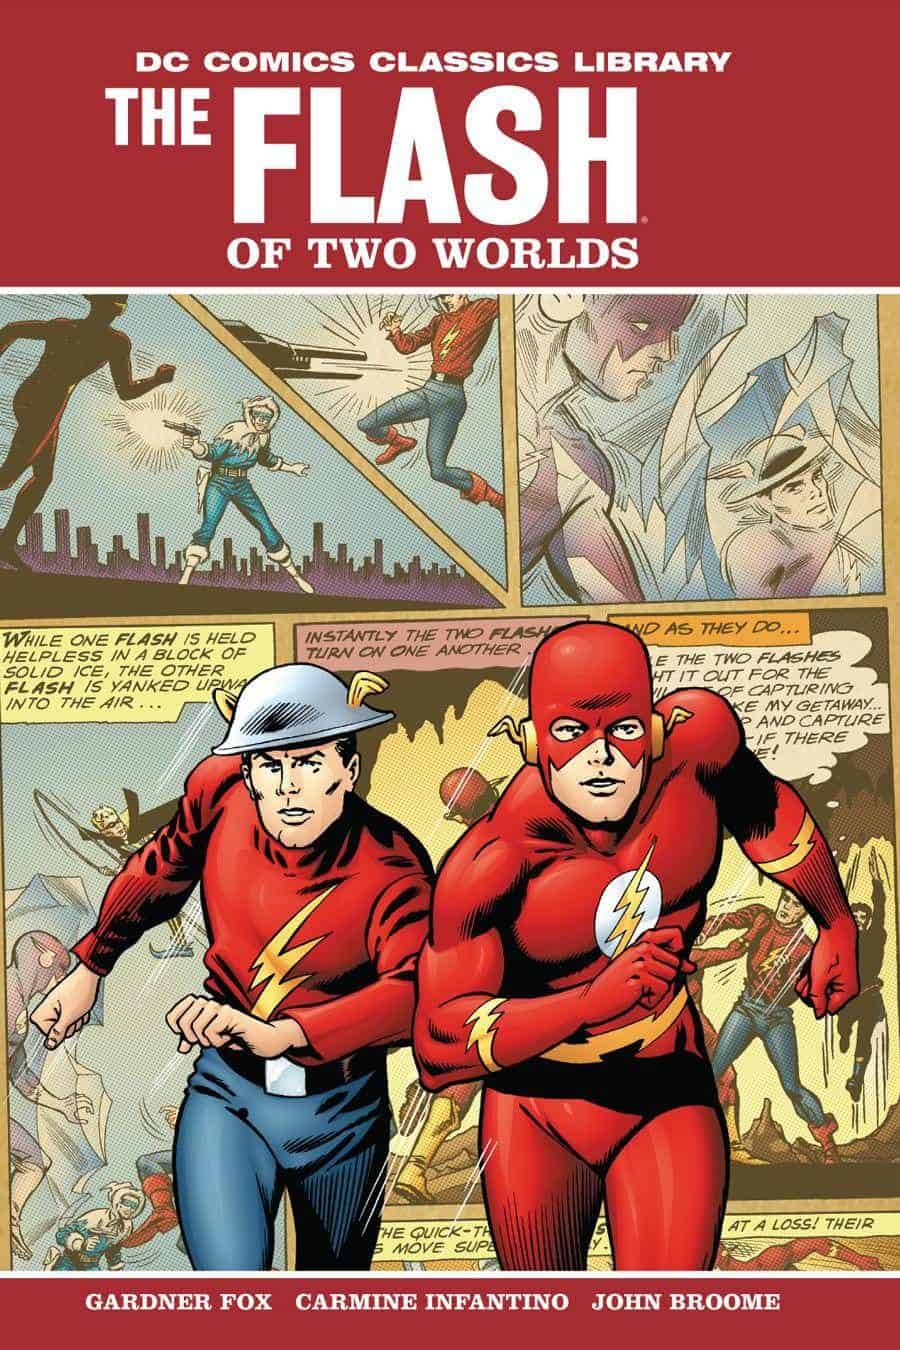 The Flash of Two Worlds tpb